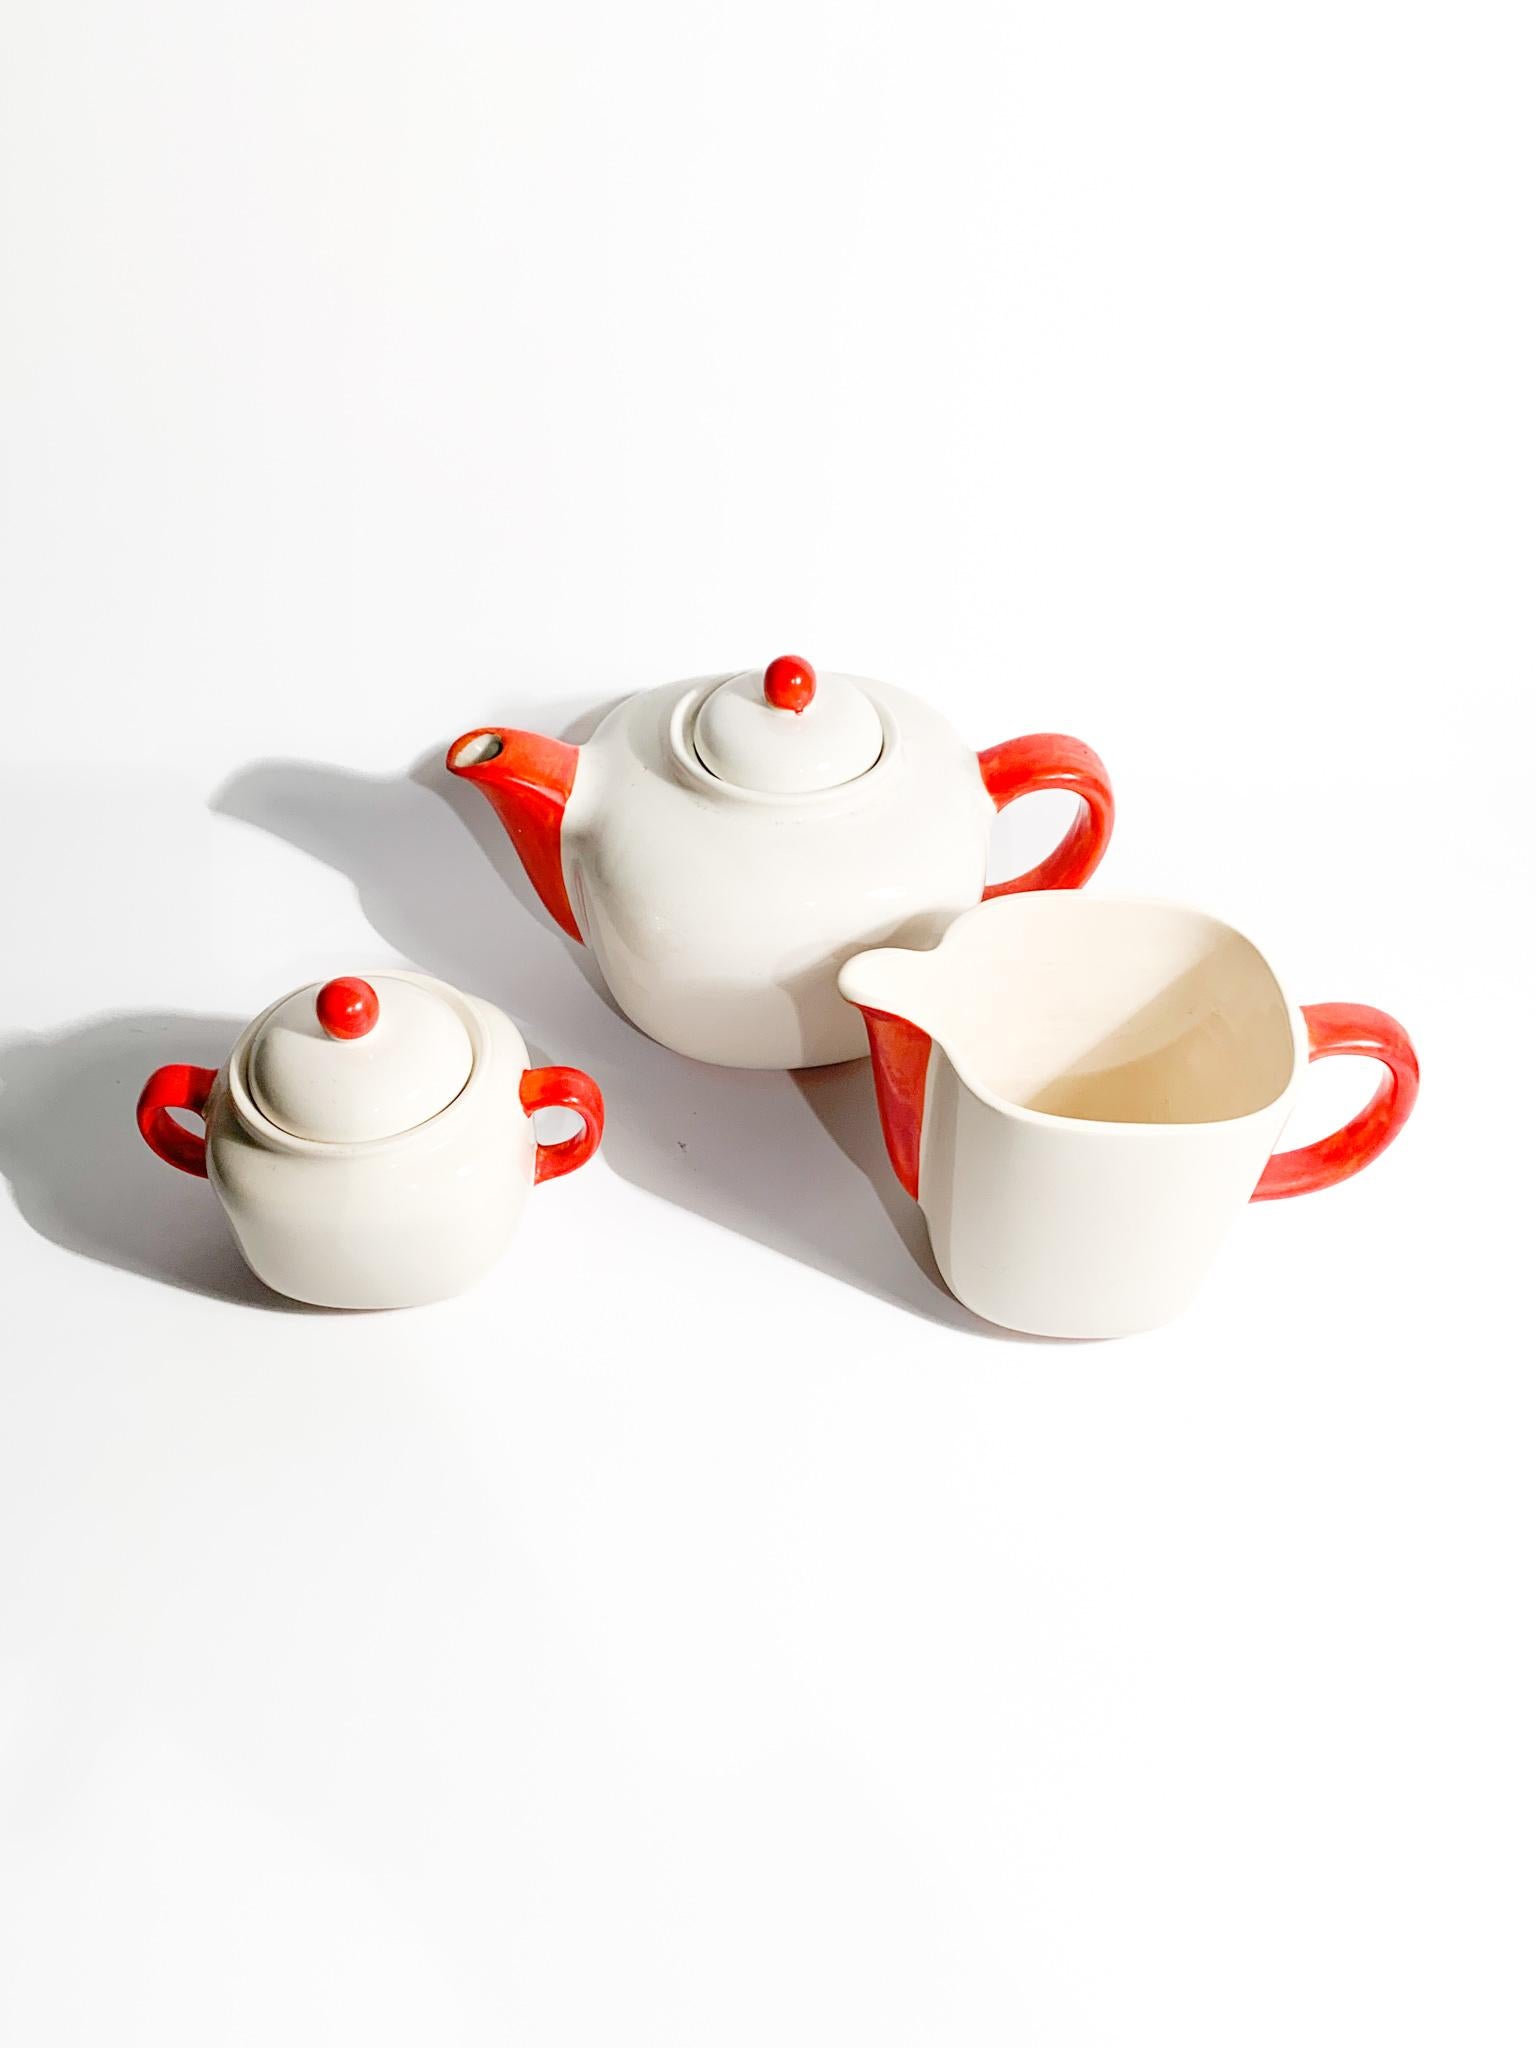 Ceramic coffee service by Richard Ginori designed by Gio Ponti in 1938. The service consists of a coffee pot, milk jug and sugar bowl.

Coffee maker - Ø 20 cm Ø cm 13 h cm 13

Company of Lombard origin founded in 1896 when the Marquis Carlo Ginori,